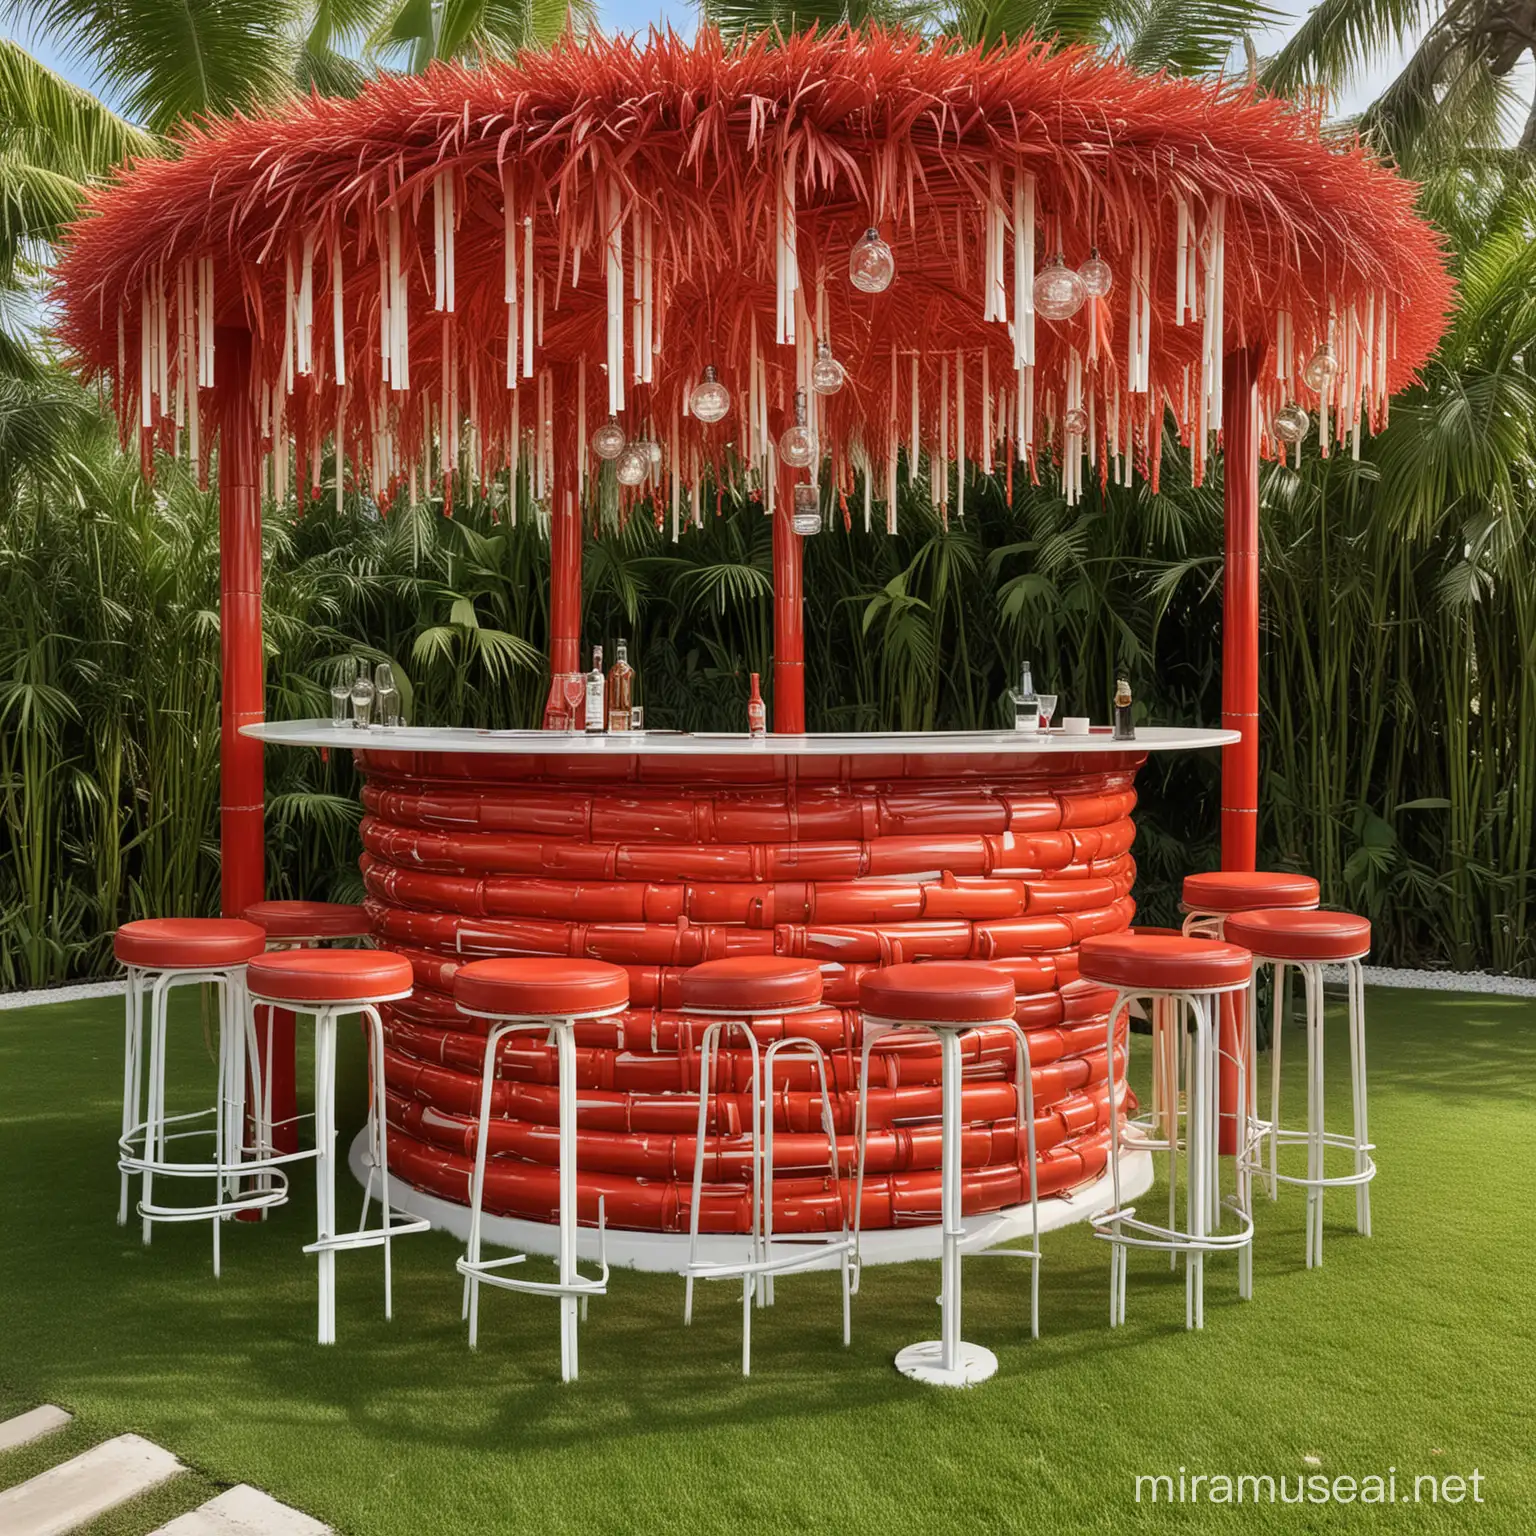 MARTINI Red and White Bar made of vertical red painted bamboos. Bar with round ceiling and big hanging curved light. Outdoor grass floor and palm tress. Few bar stools. Few bottles on display